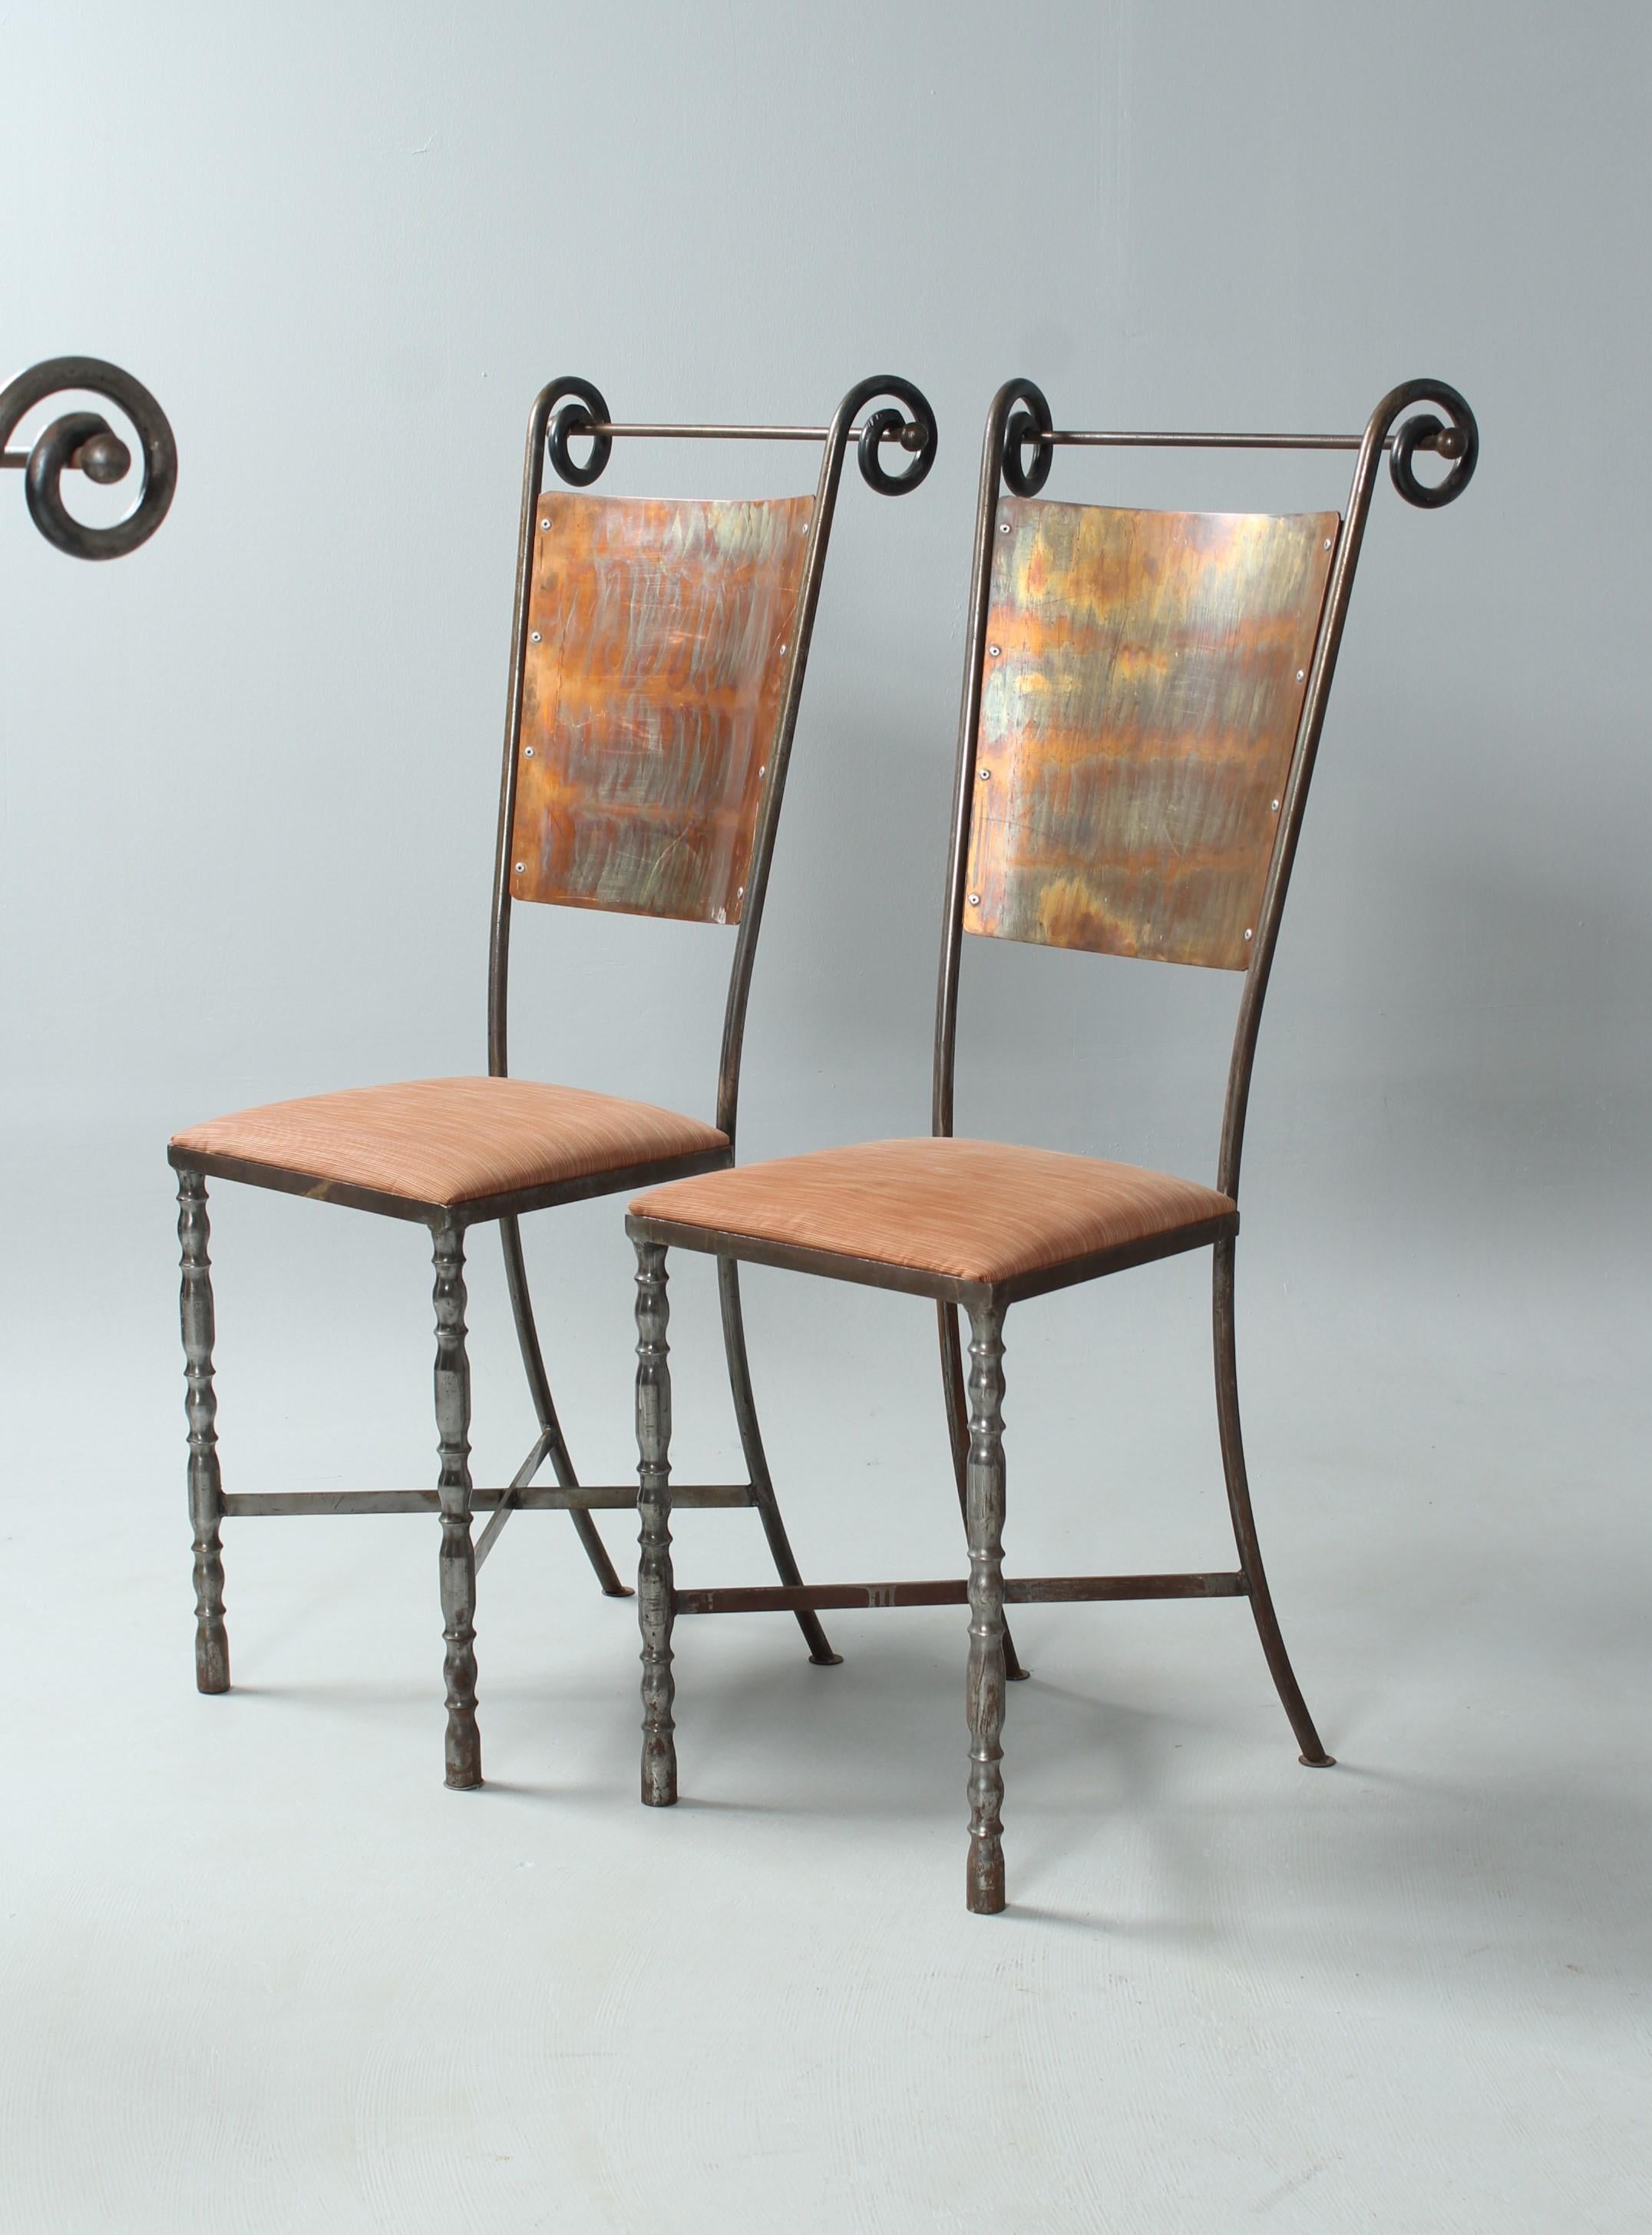 Set of 8 Wrought Iron Chairs, Dining Chairs, 1980s? For Sale 7